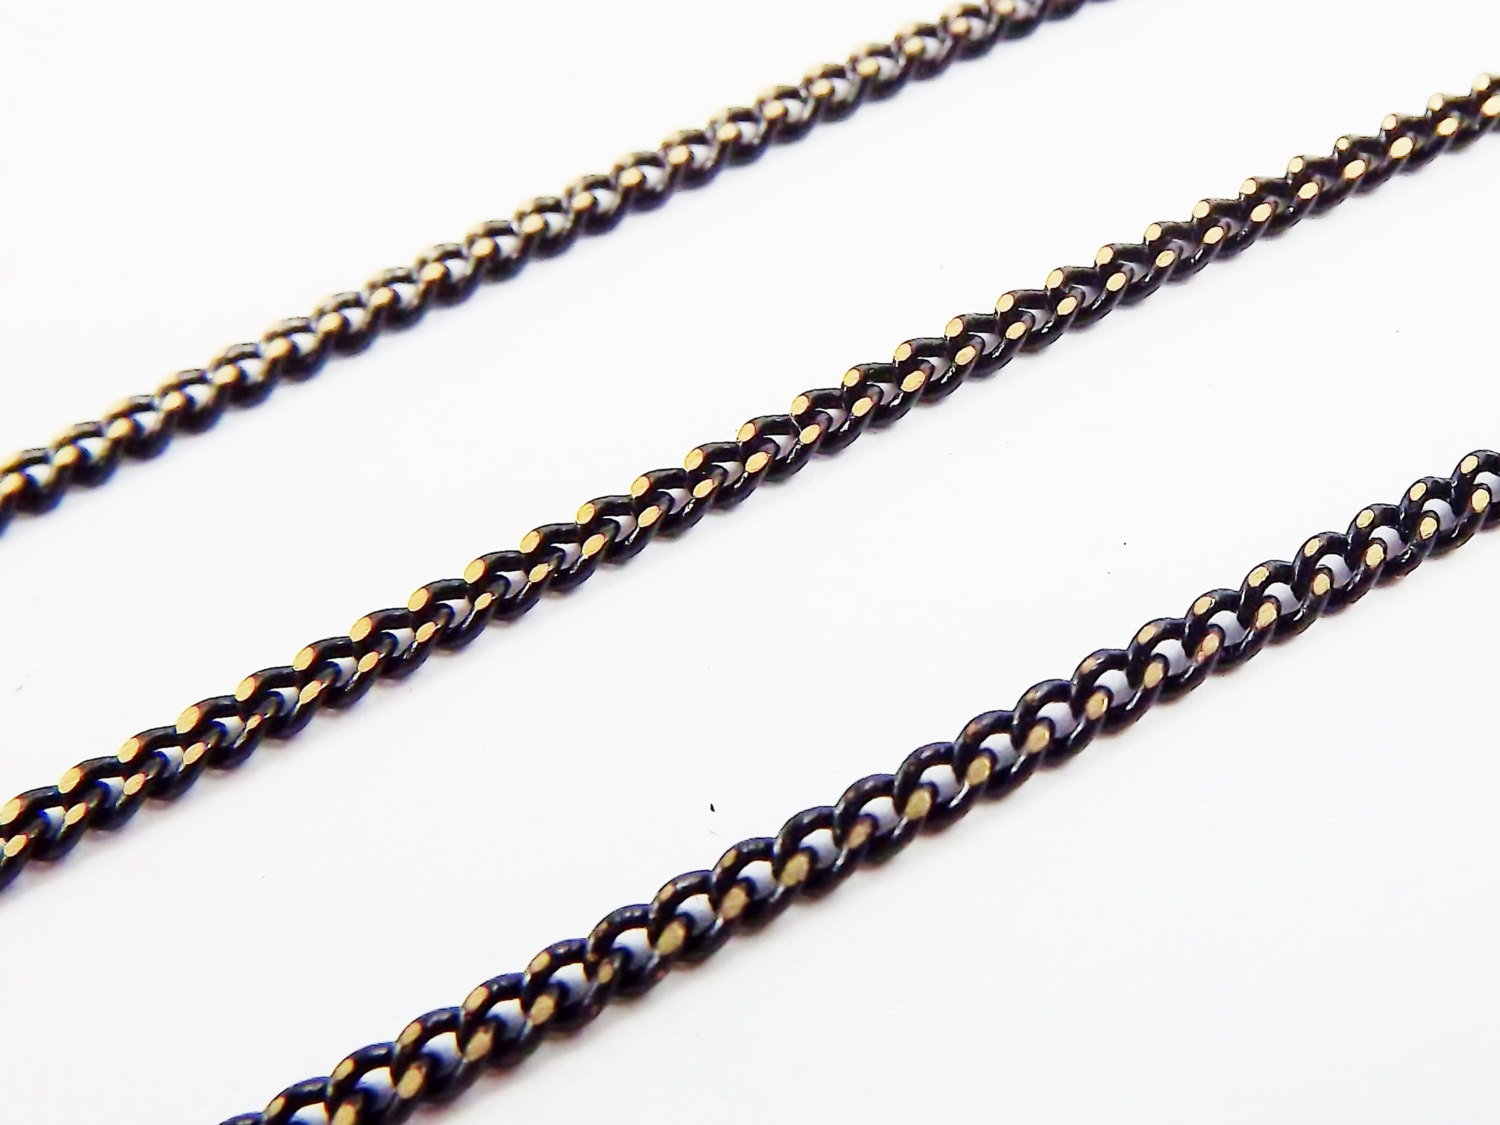 2.5 x 2mm Black Gold Brass Delicate Curb Chain  - Black  - 1 Meter  or 3.3 Feet